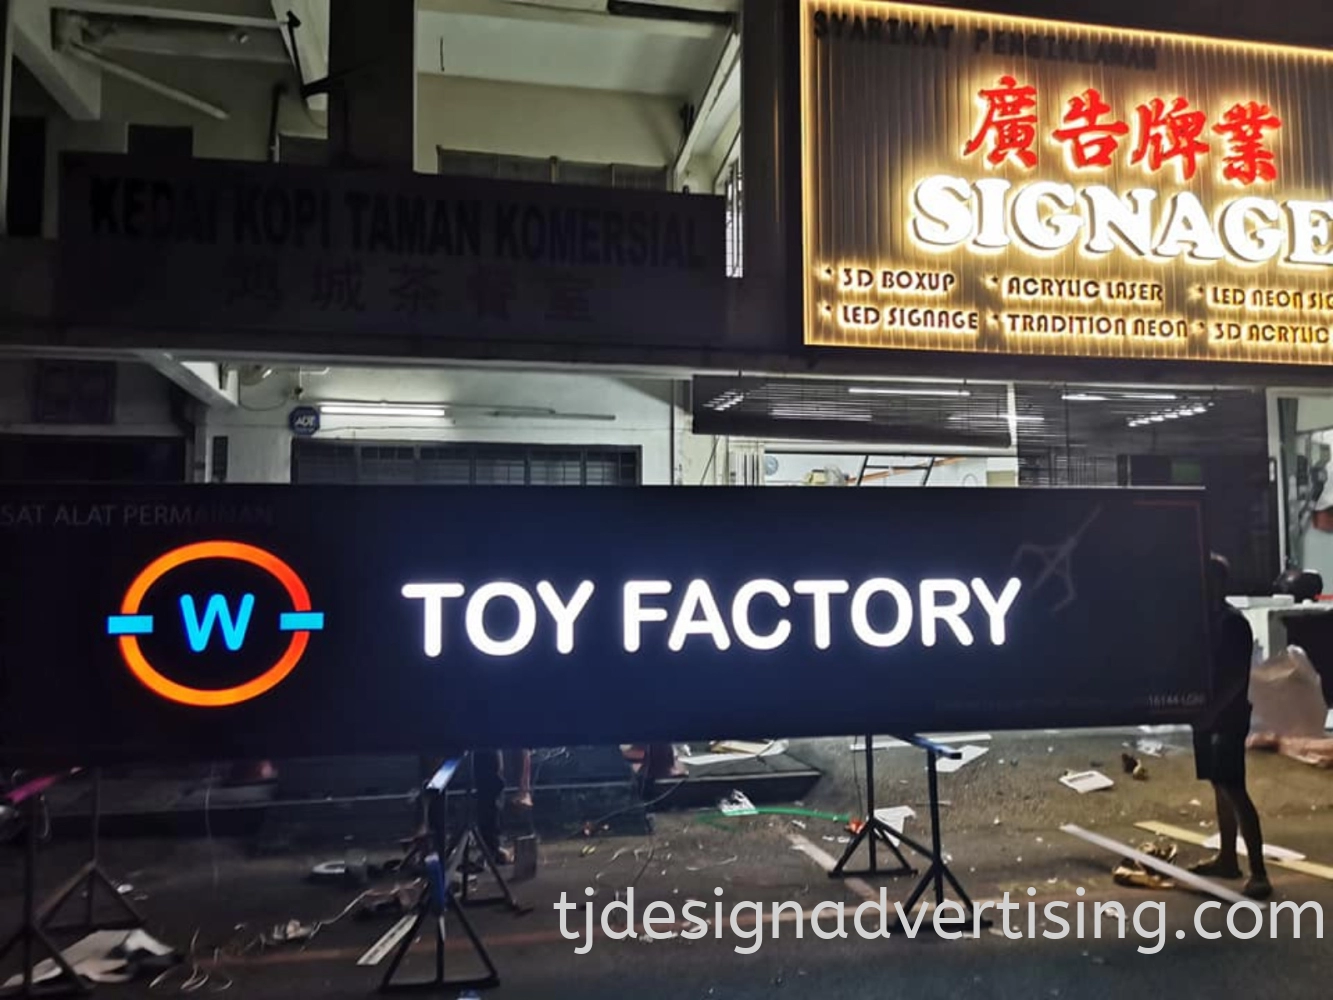 Box-Up 3D Signage - TOY FACTORY